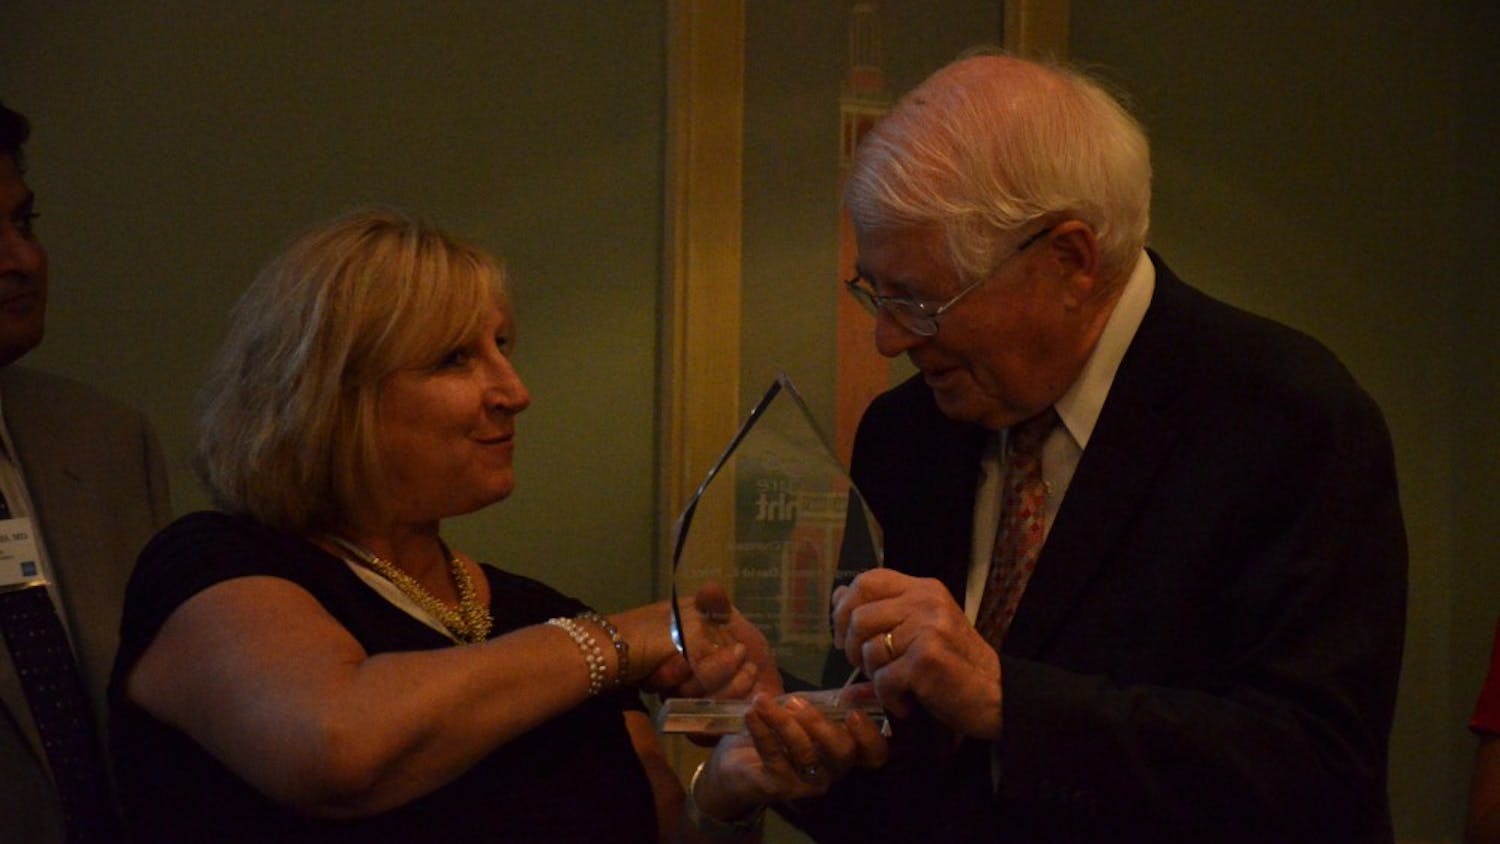 Executive Director of Cure HTT, Marianne S. Clancy, presents Congressman David Price an award on behalf of Cure HTT in August for his work in passing legislation on behalf of those affected by the genetic disease. Price, along with Gov. Roy Cooper, opposed the the proposed Republican health care bill.&nbsp;